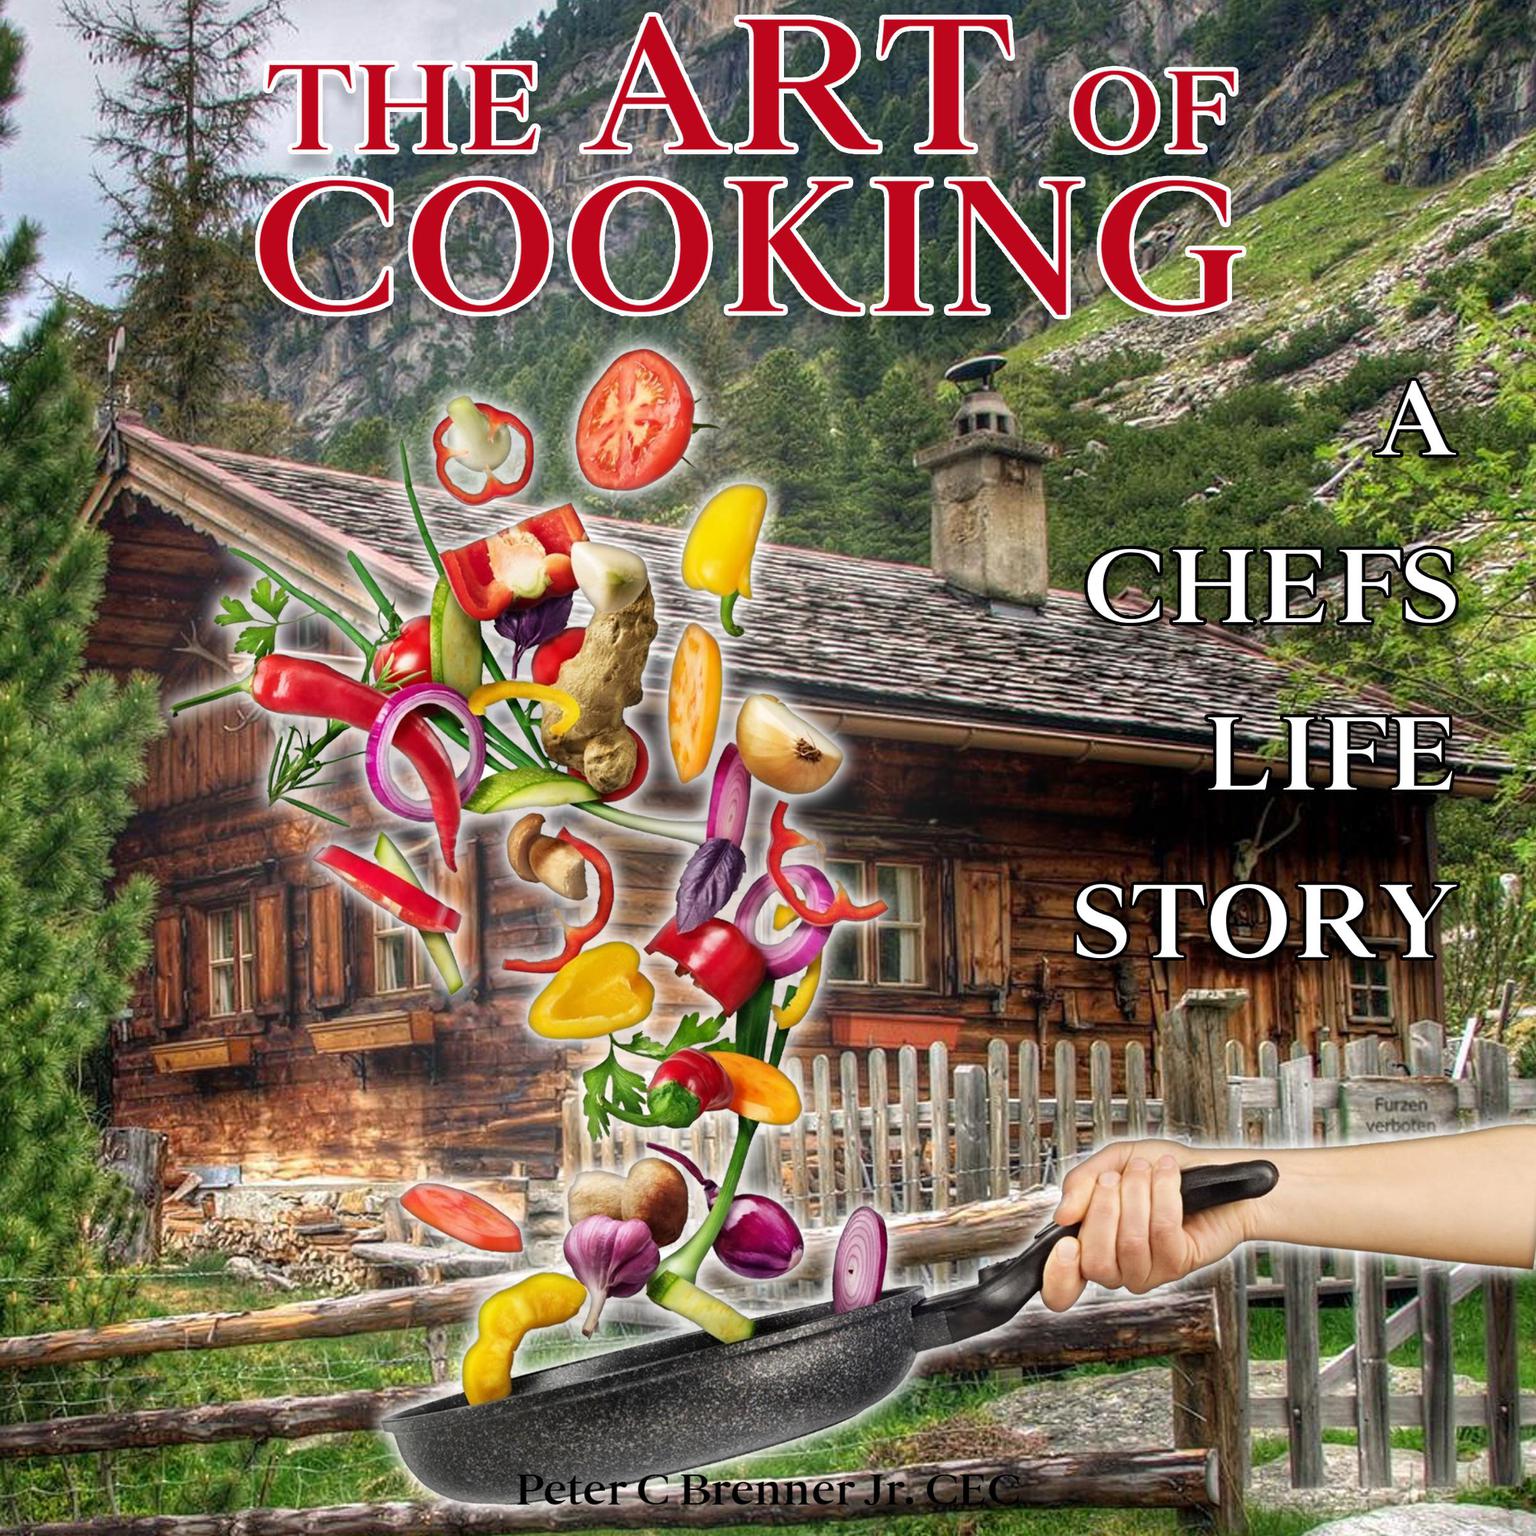 The Art of Cooking (Abridged) Audiobook, by Peter C. Brenner Jr. CEC